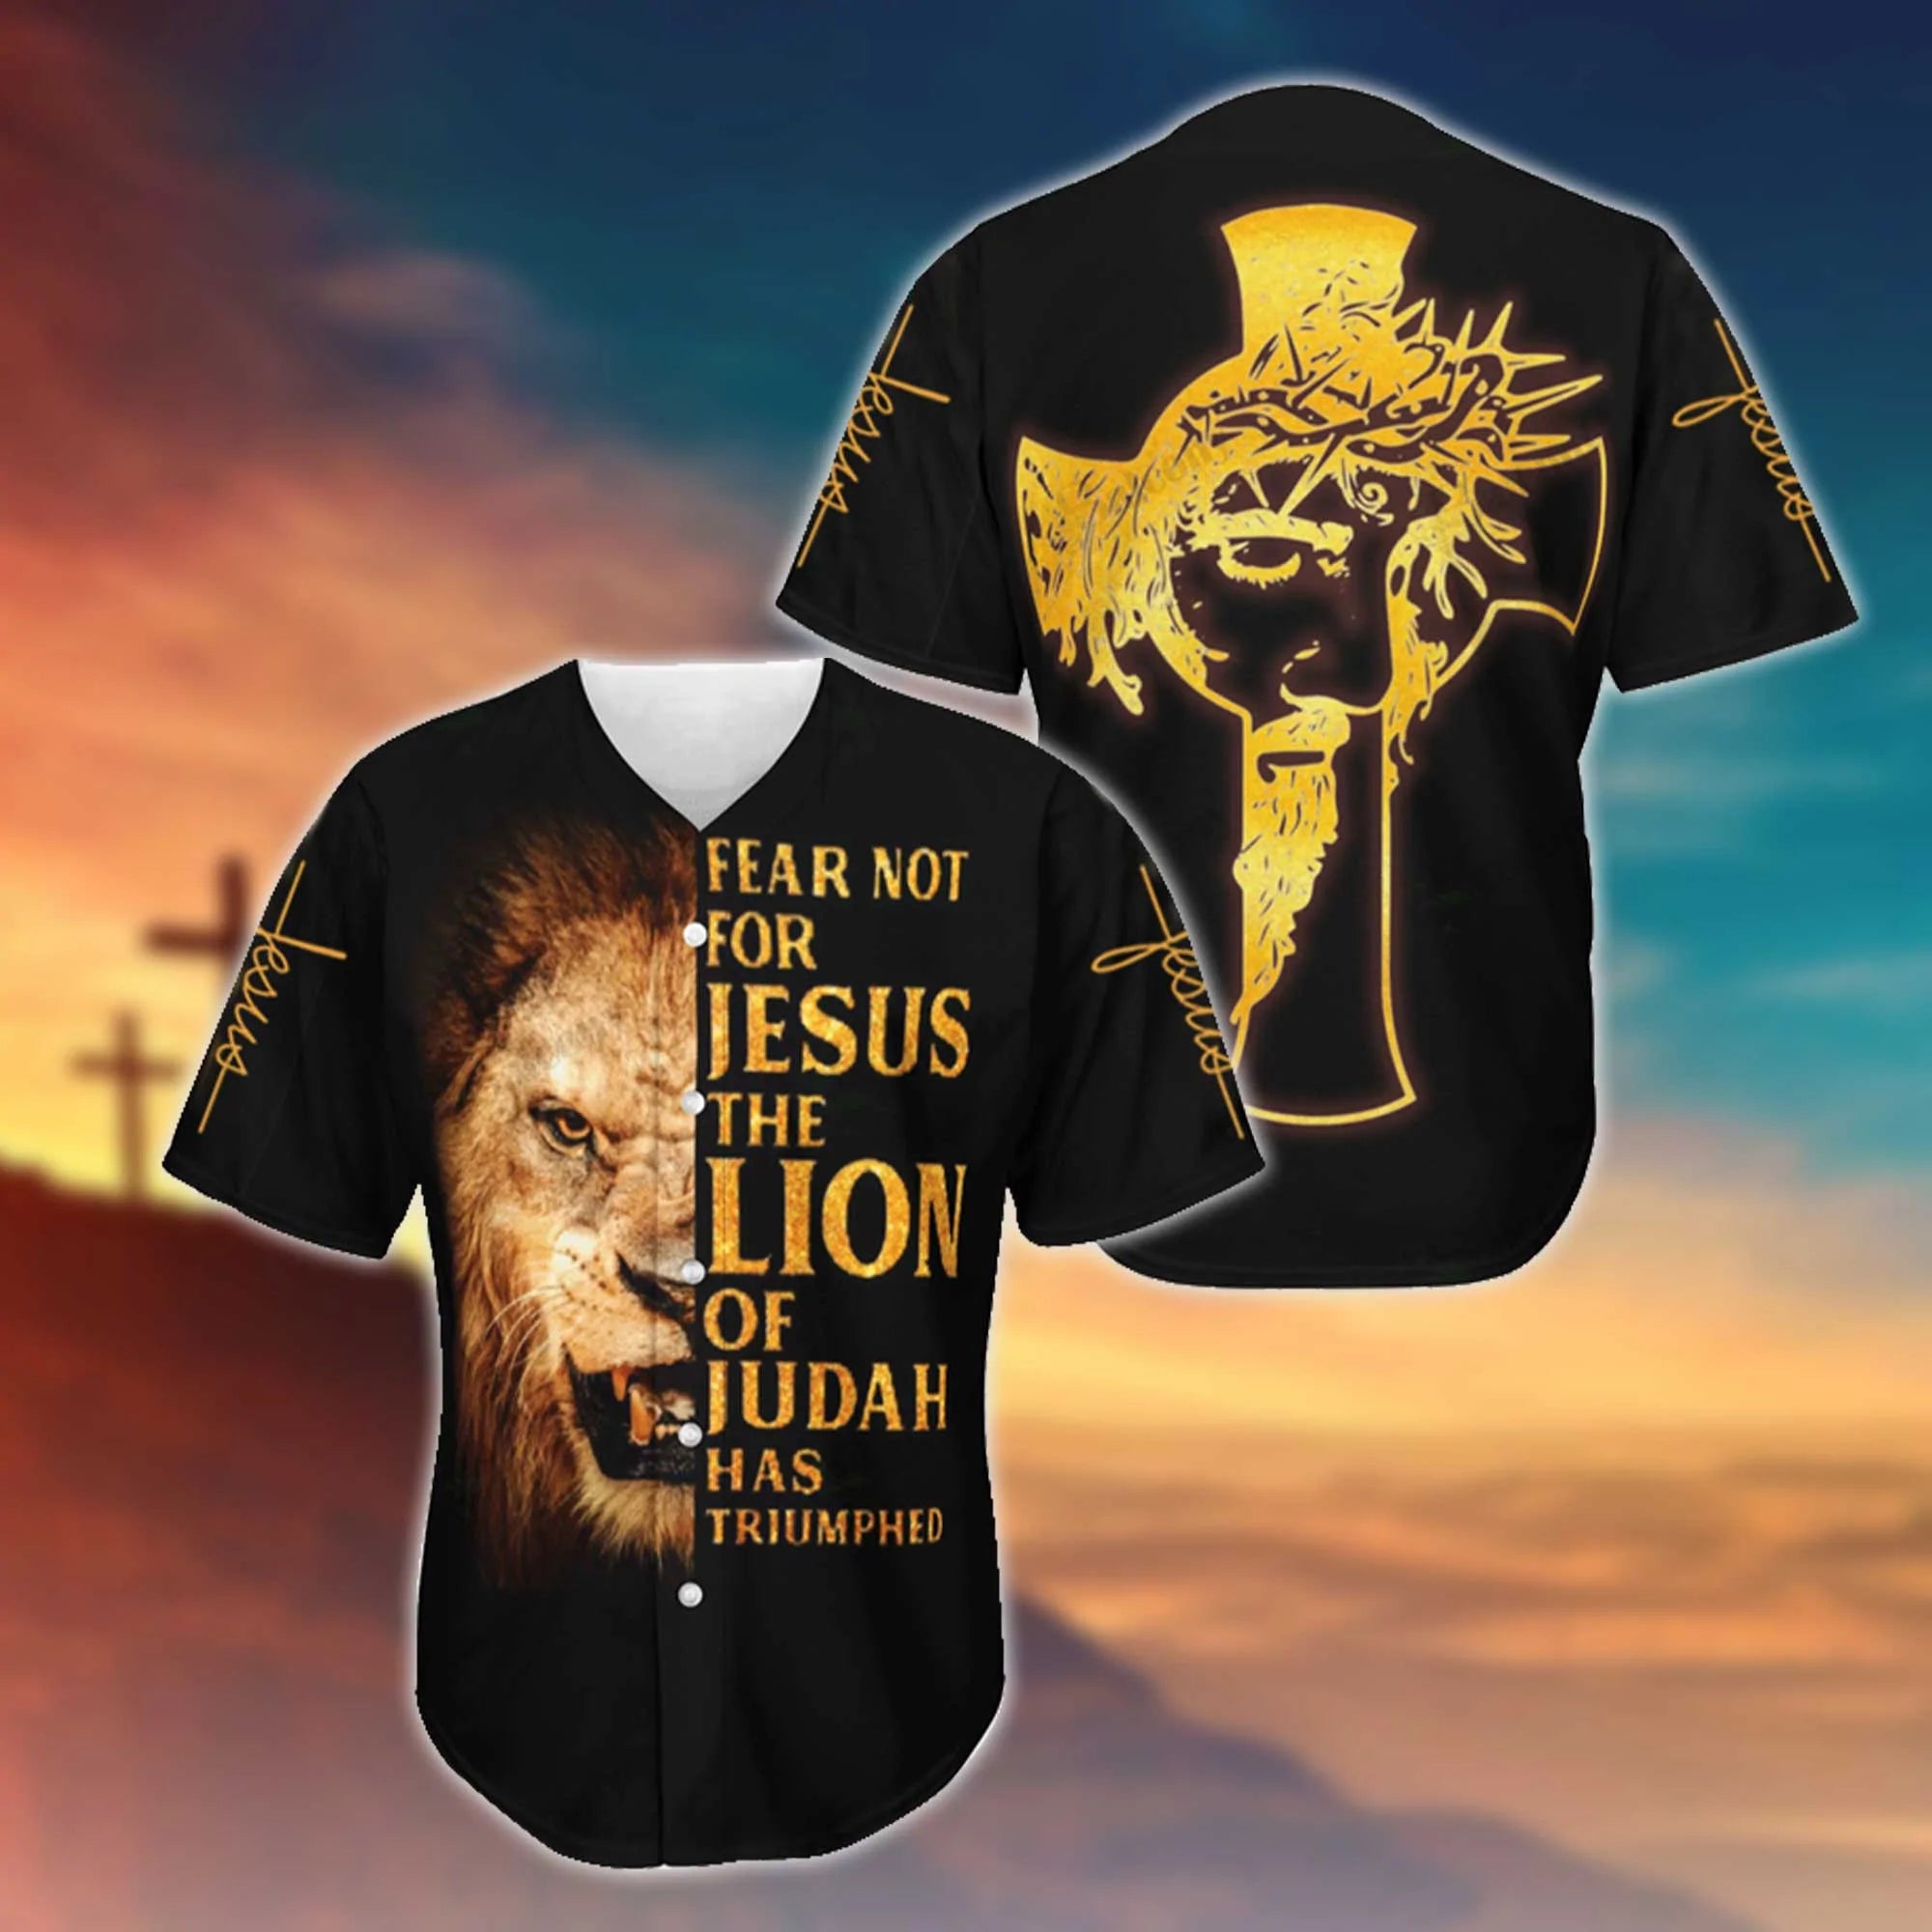 Fear Not For Jesus The Lion Of Judah Has Triumphed Printed 3D Baseball Jersey For Men and Women